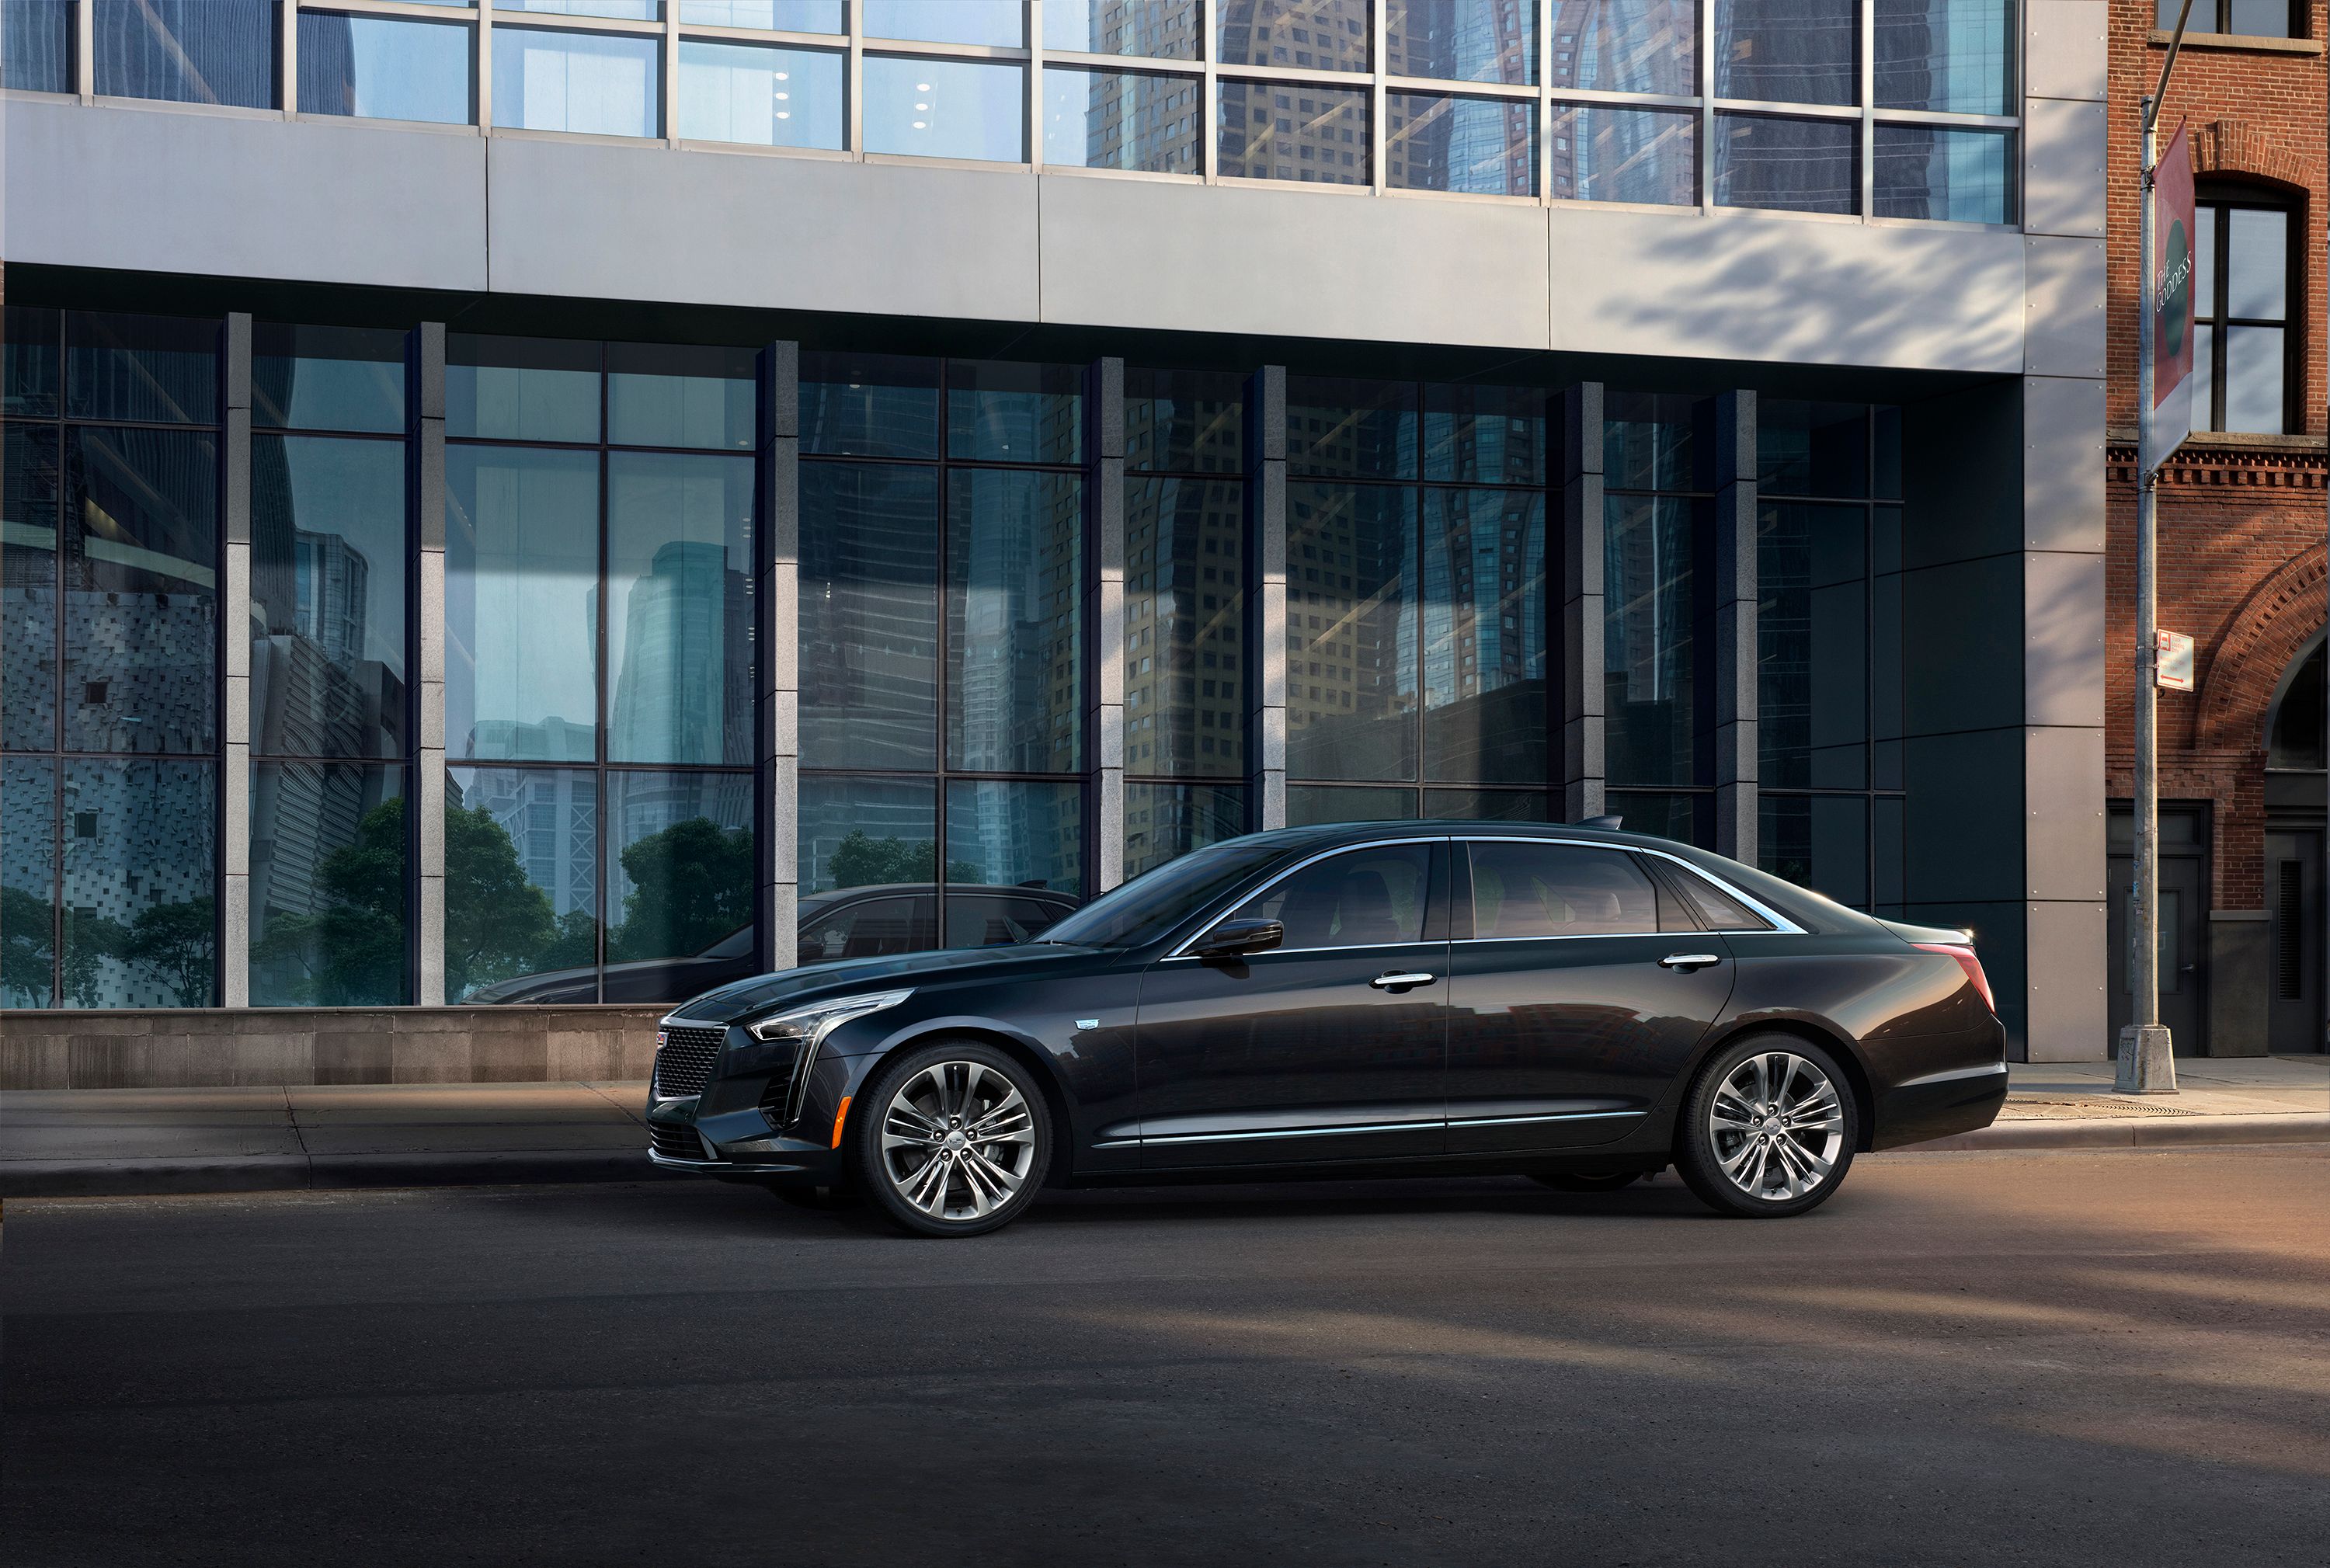 2020 Cadillac's Most Powerful and Advanced V-8 Sits on the Sidelines, but Why?